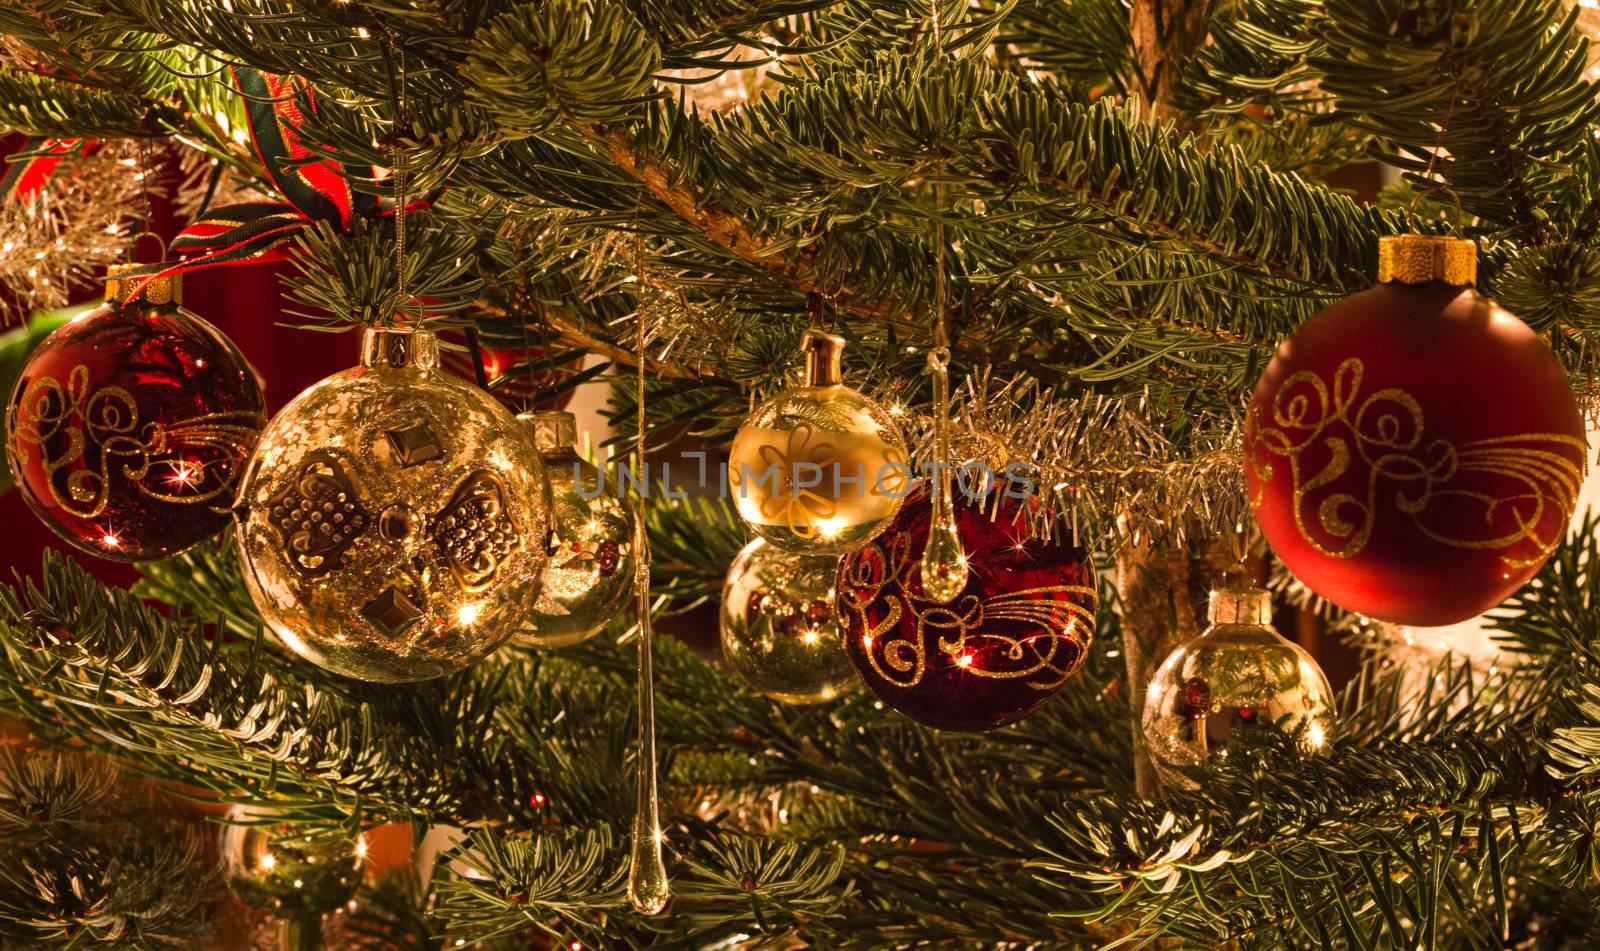 Colorful image of decoration in christmas tree by Colette